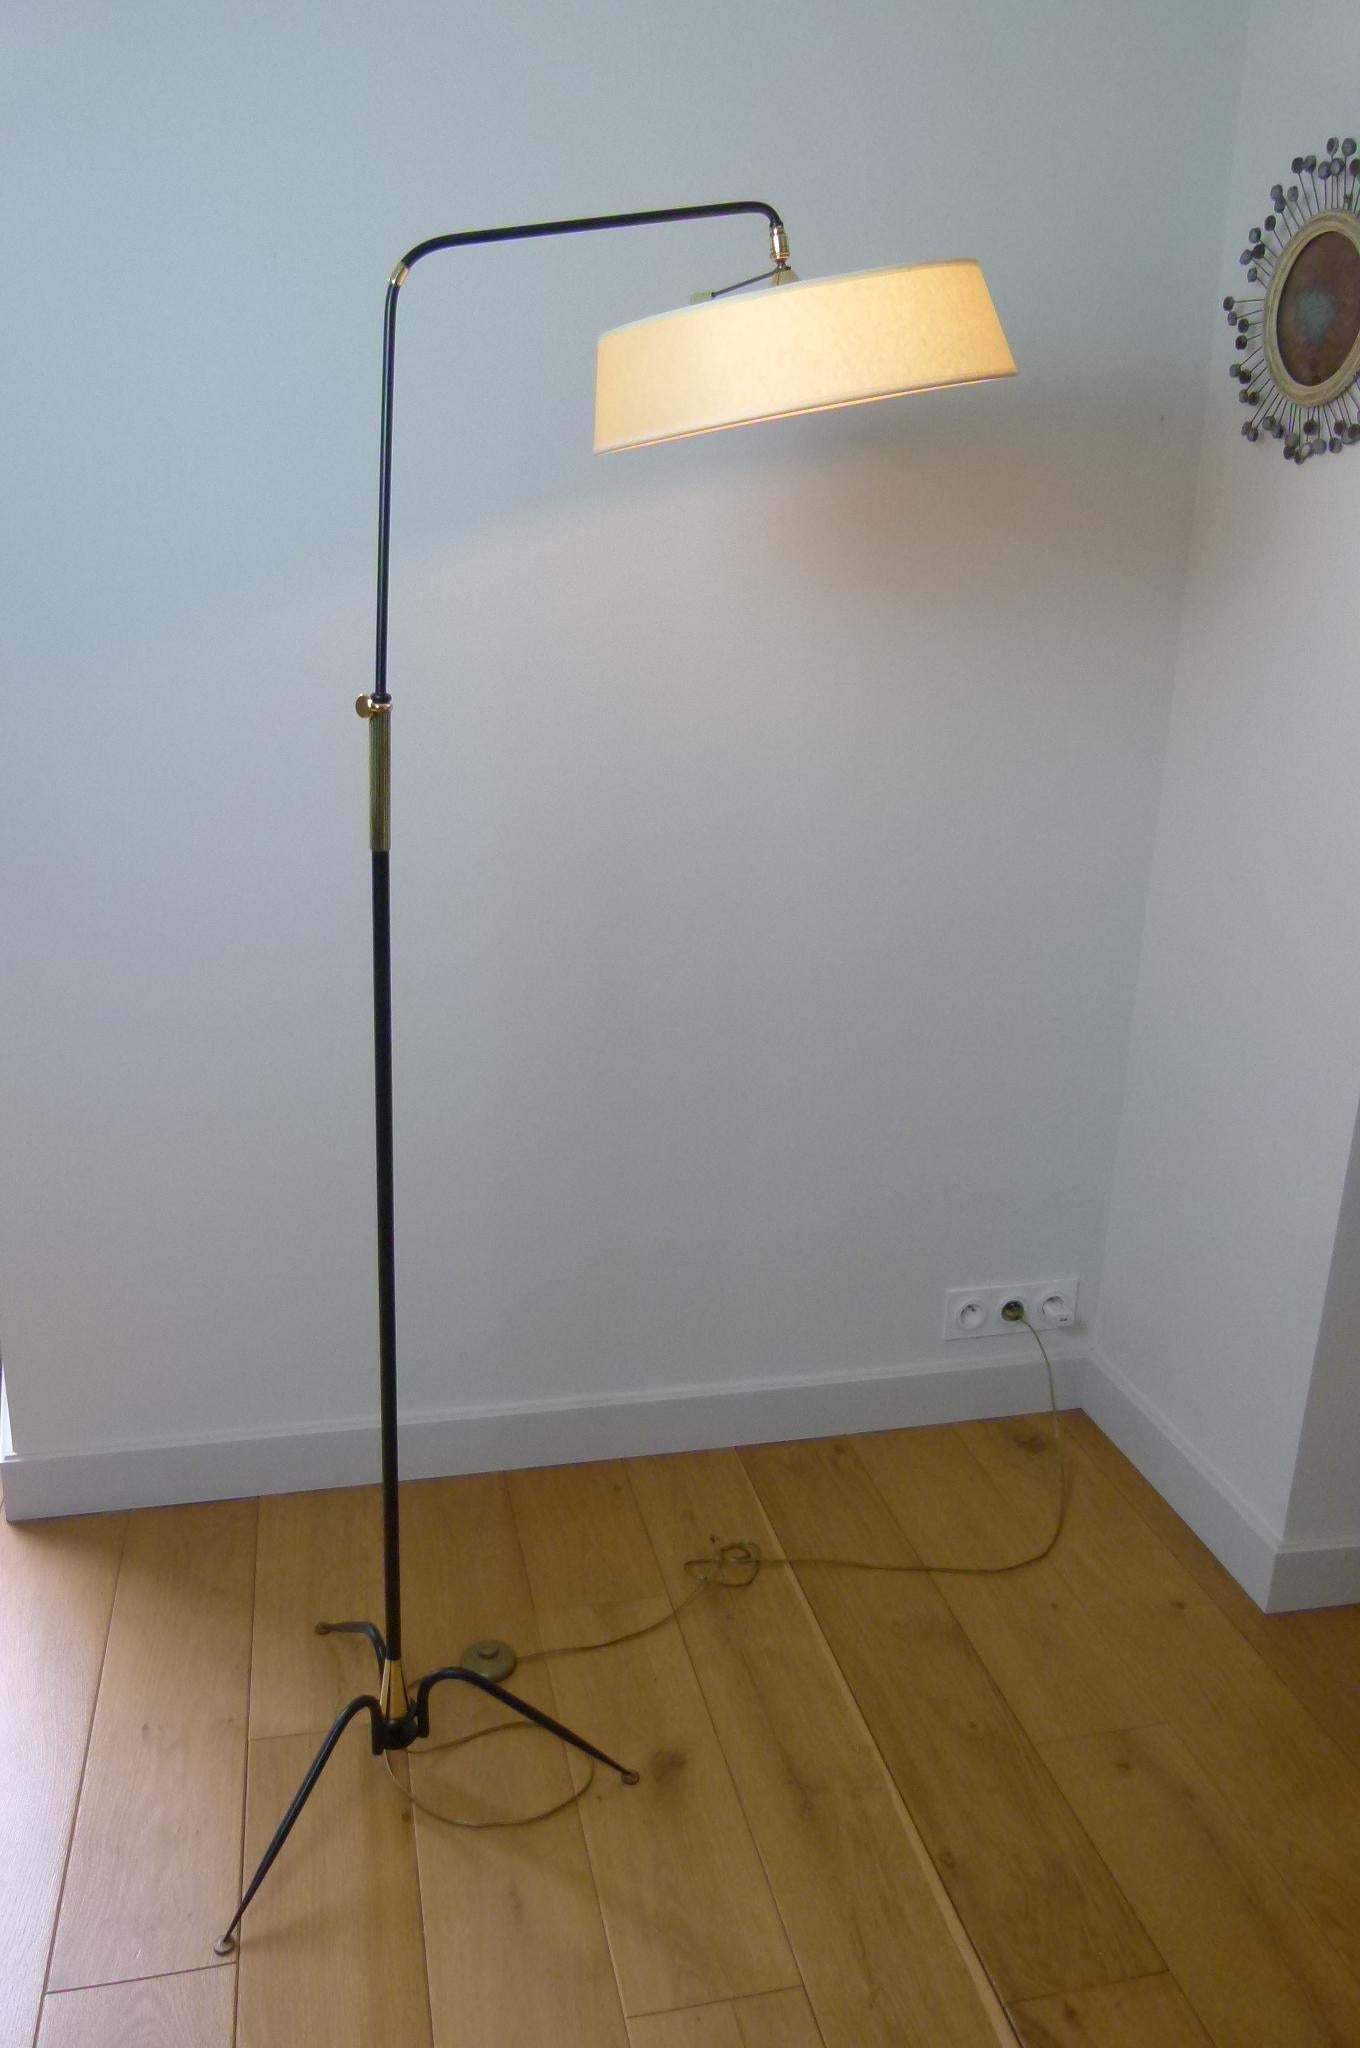 1950 Floor Lamp by Lunel 1